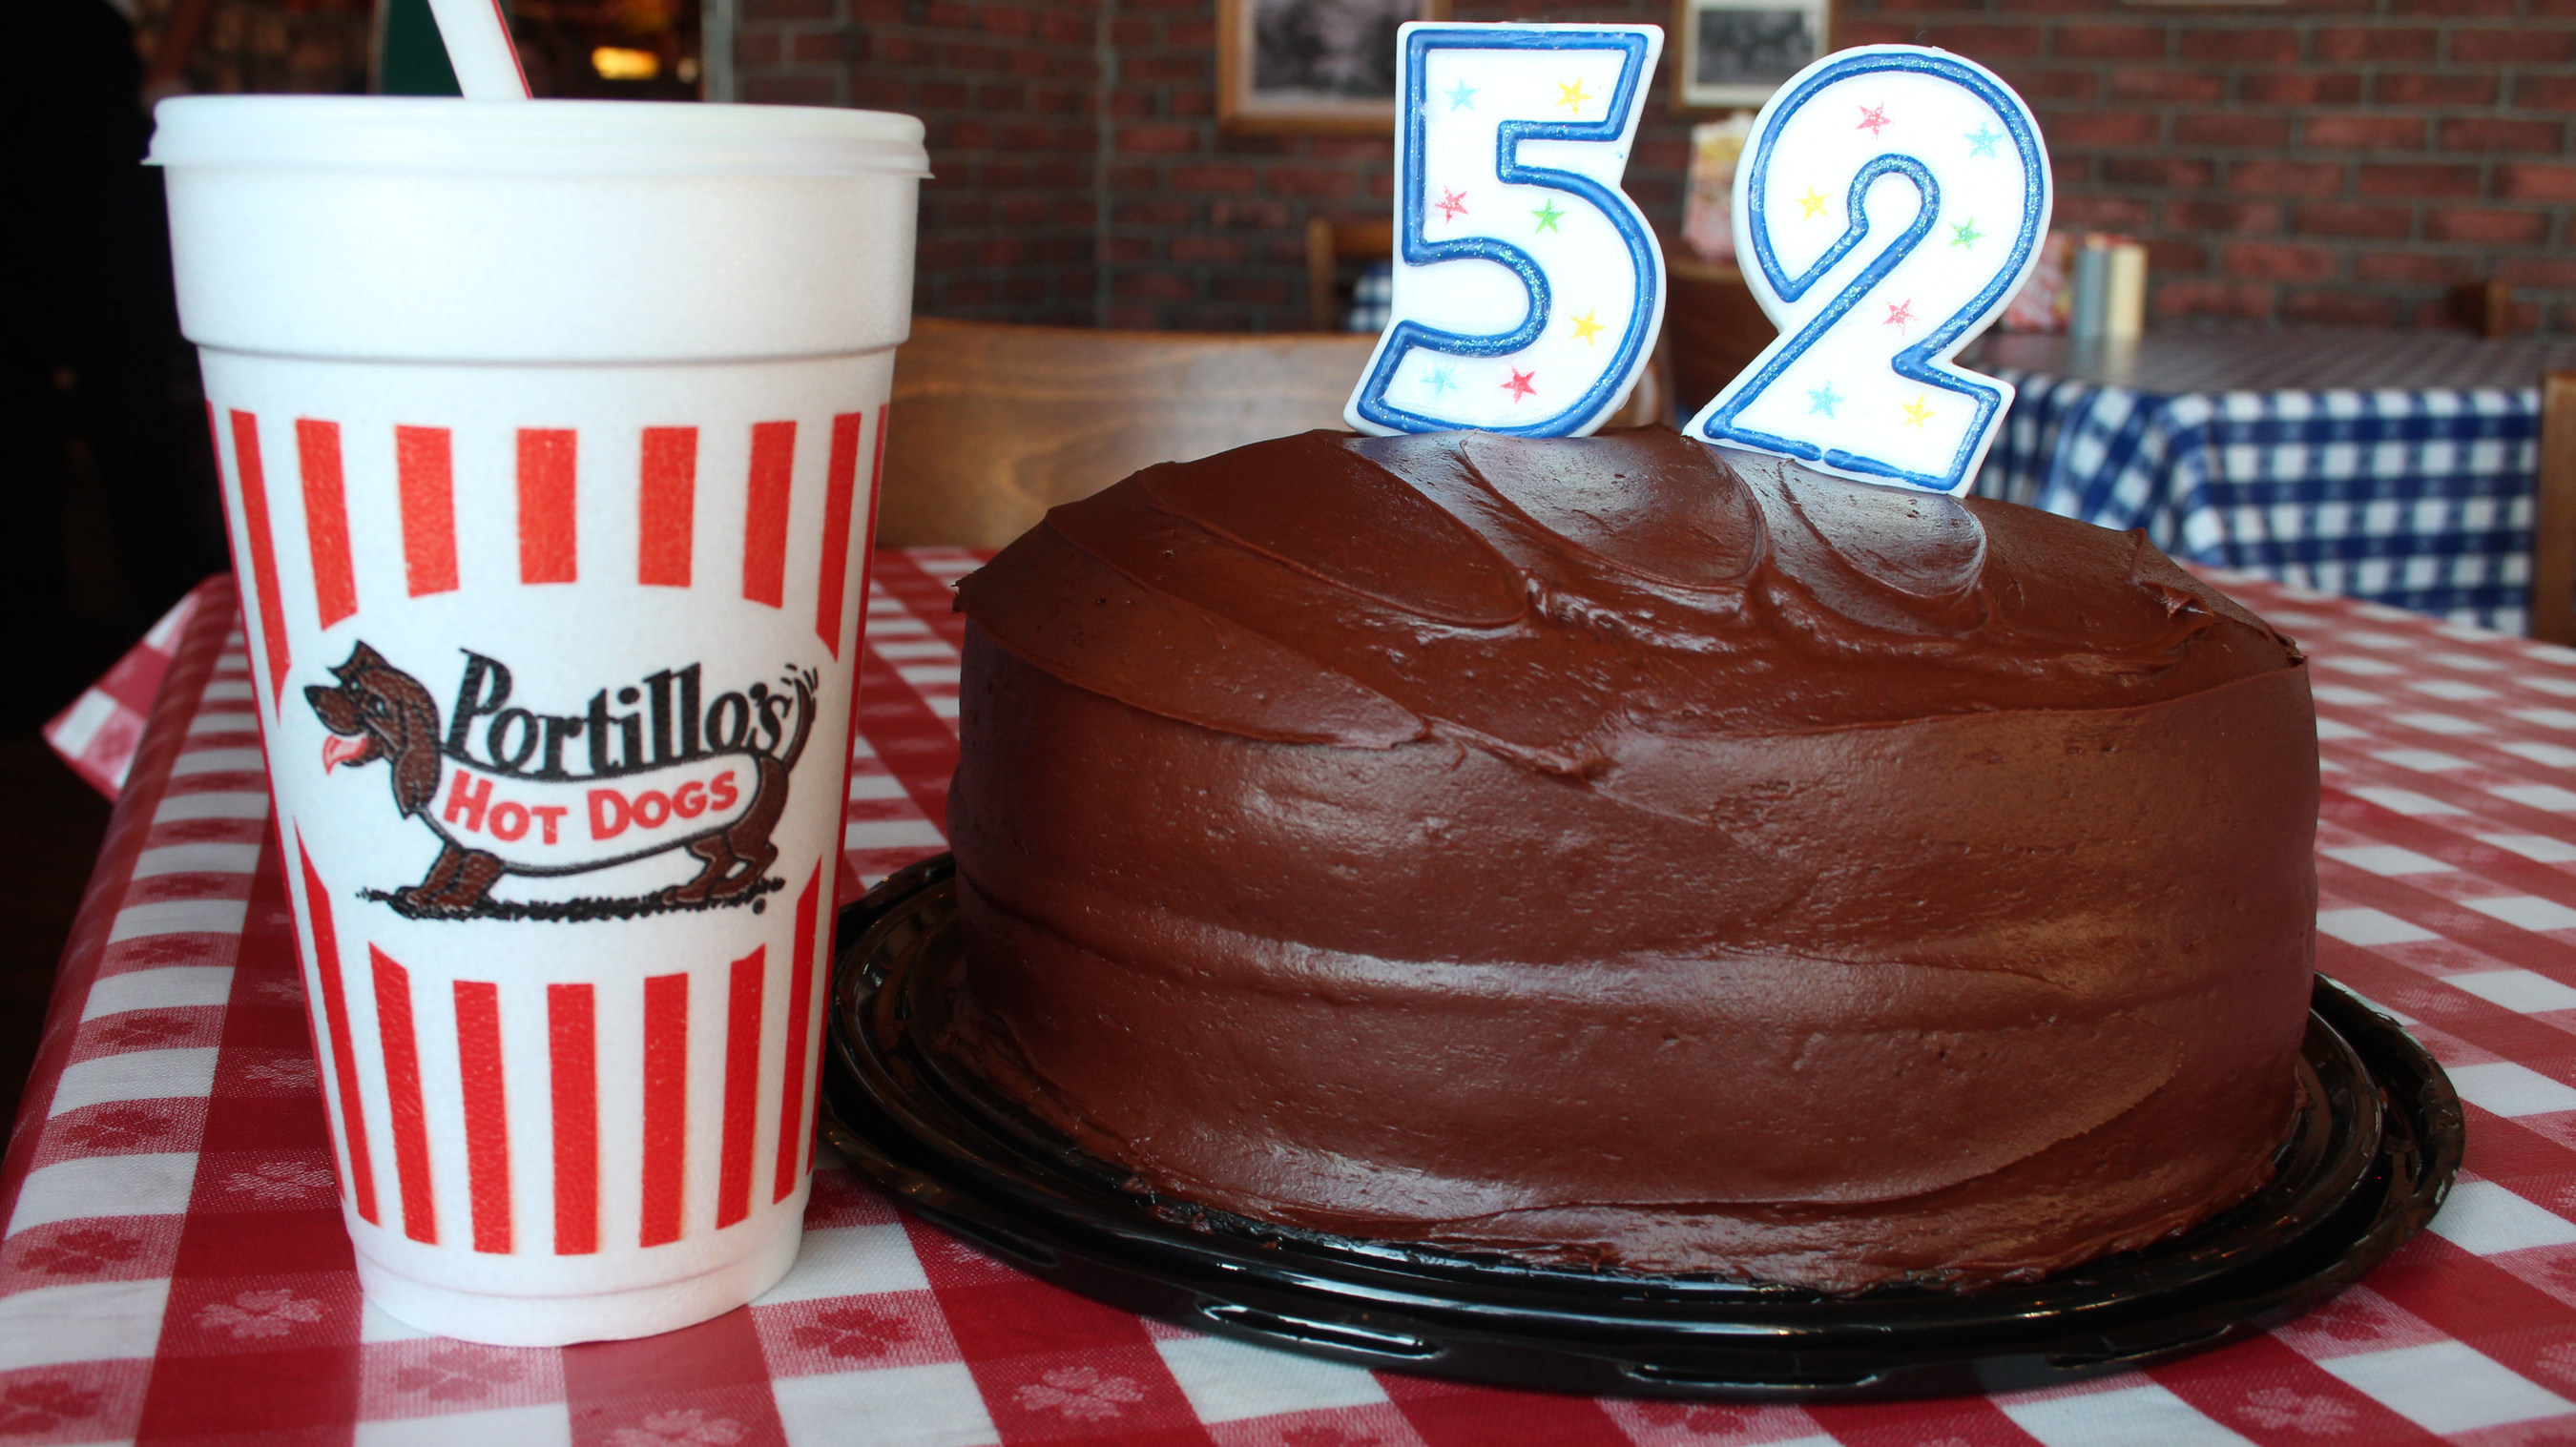 Fans can now visit Portillos.com/FreeCake to sign up as a Portillo's Birthday Club member and enjoy a free piece of Portillo's famous chocolate cake on their birthday.